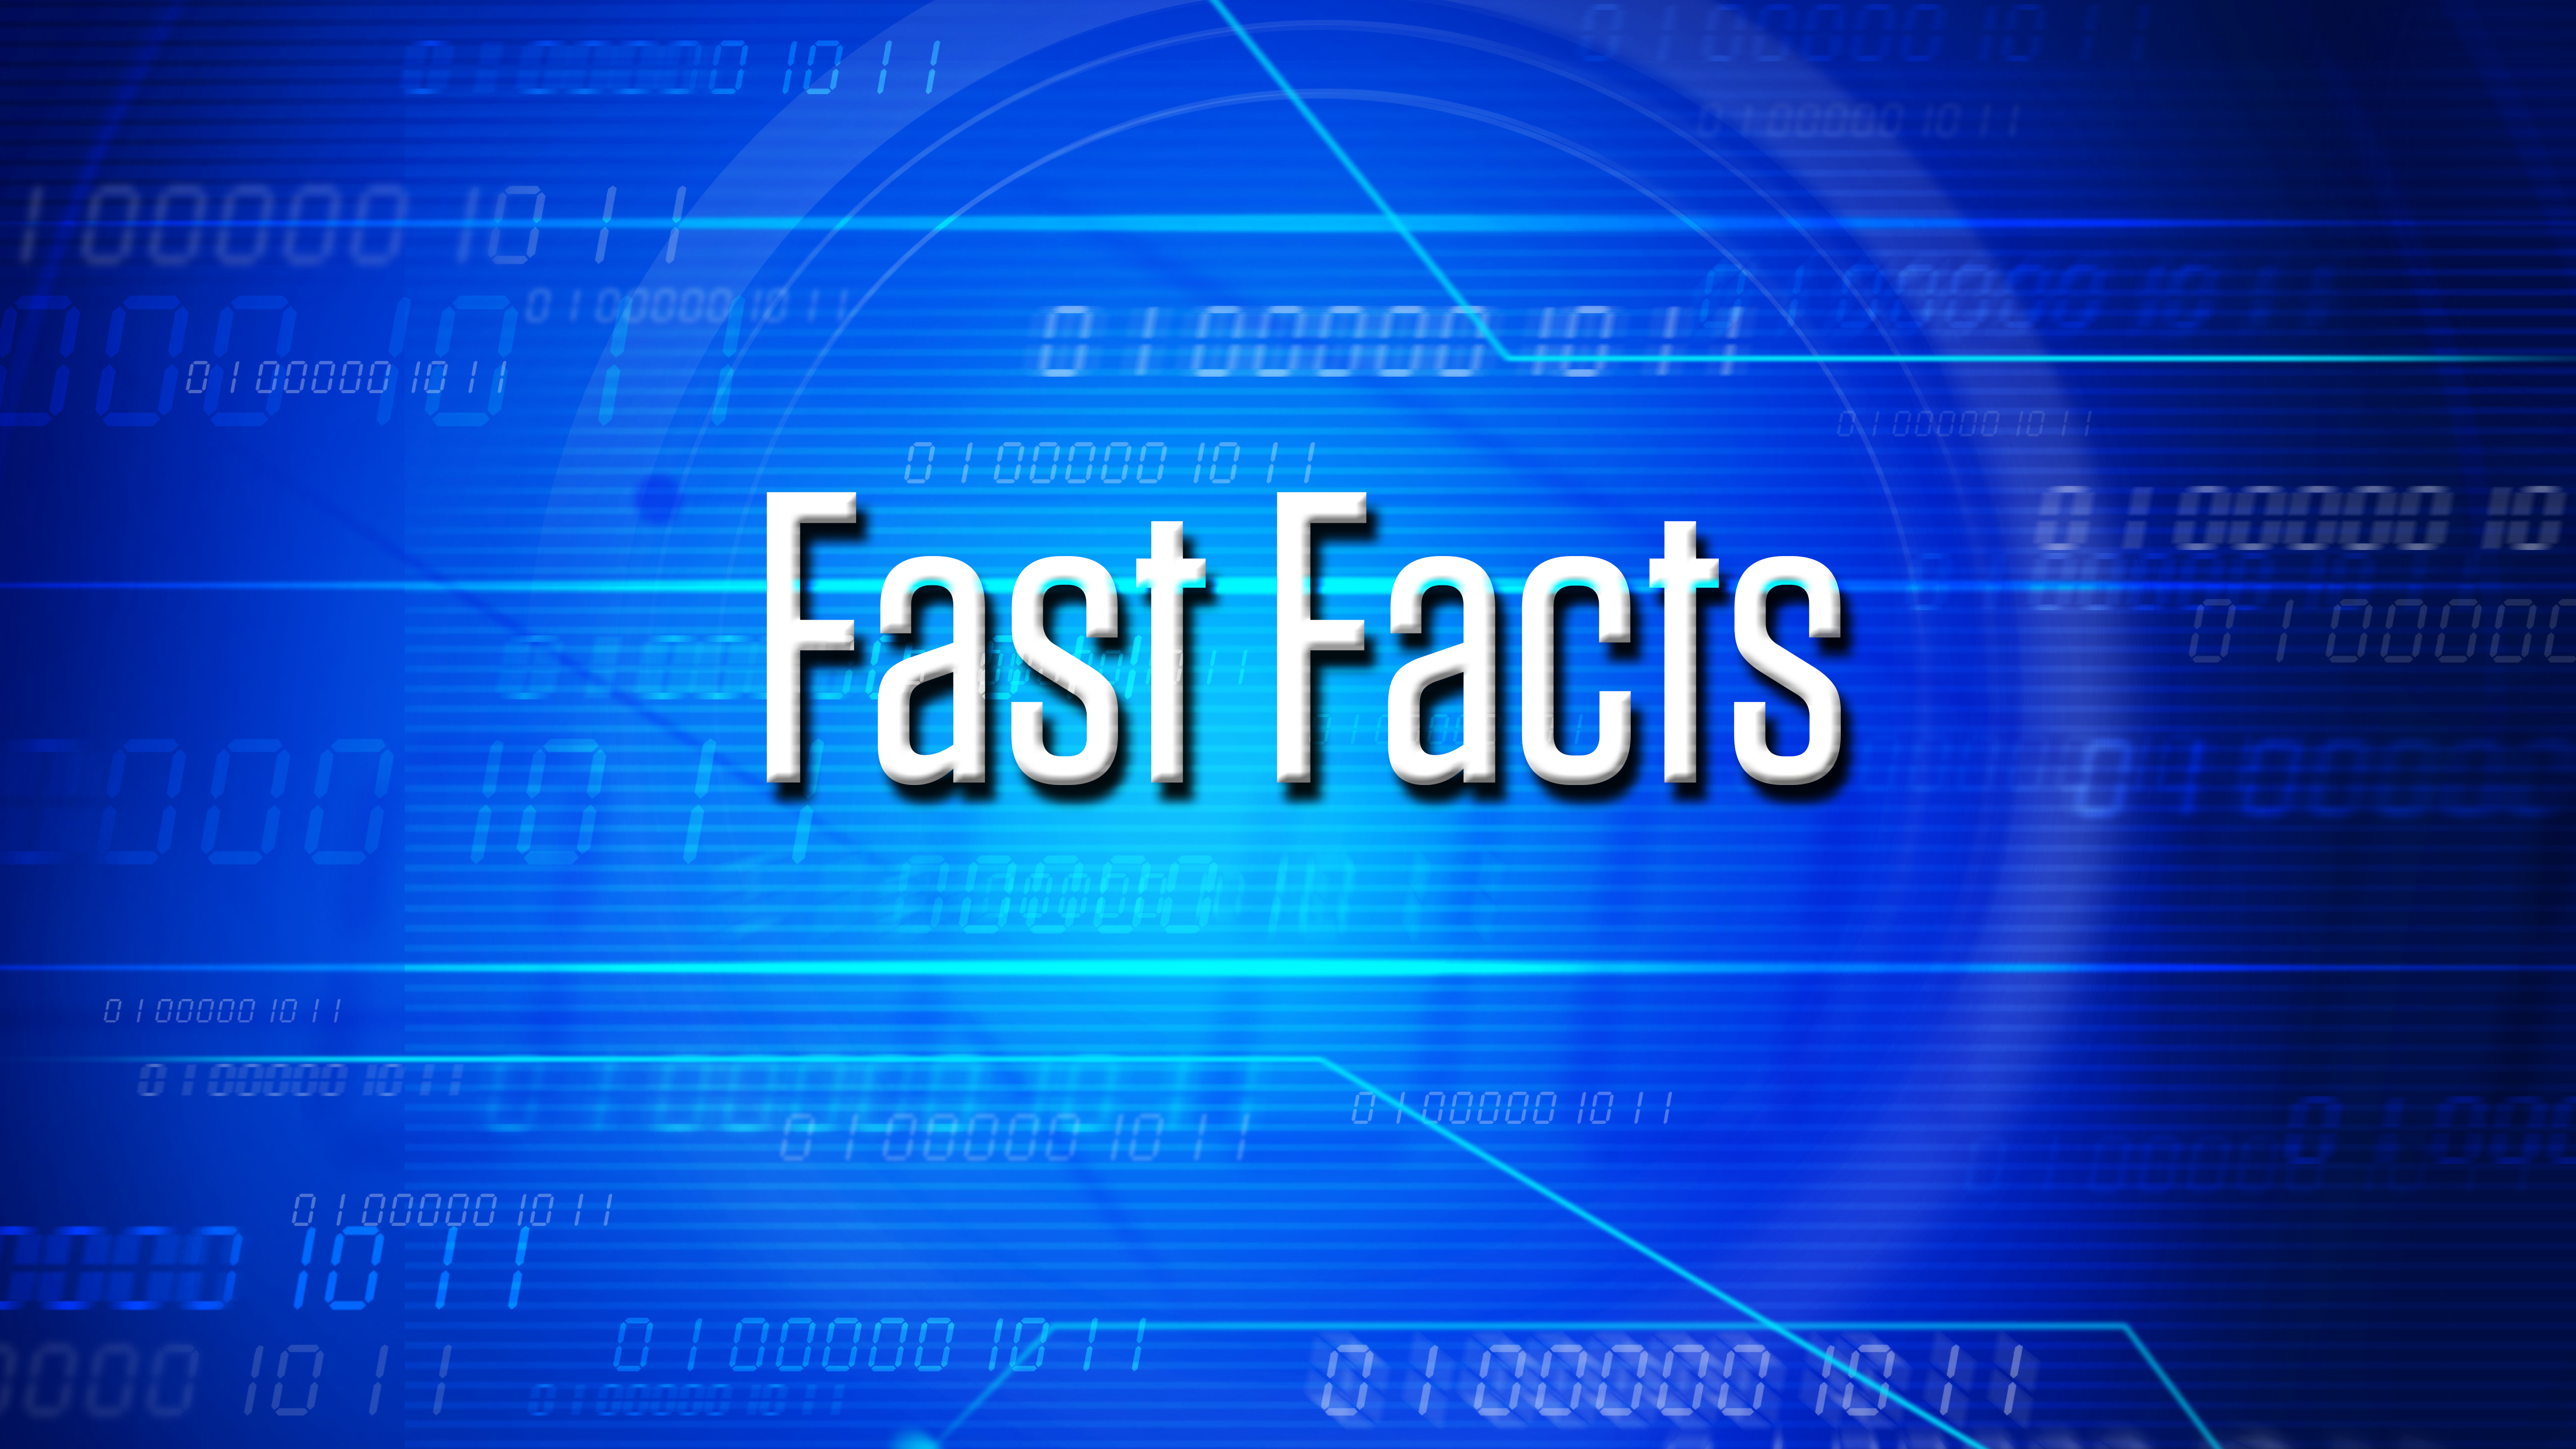 Blue background with words "Fast Facts" in white.